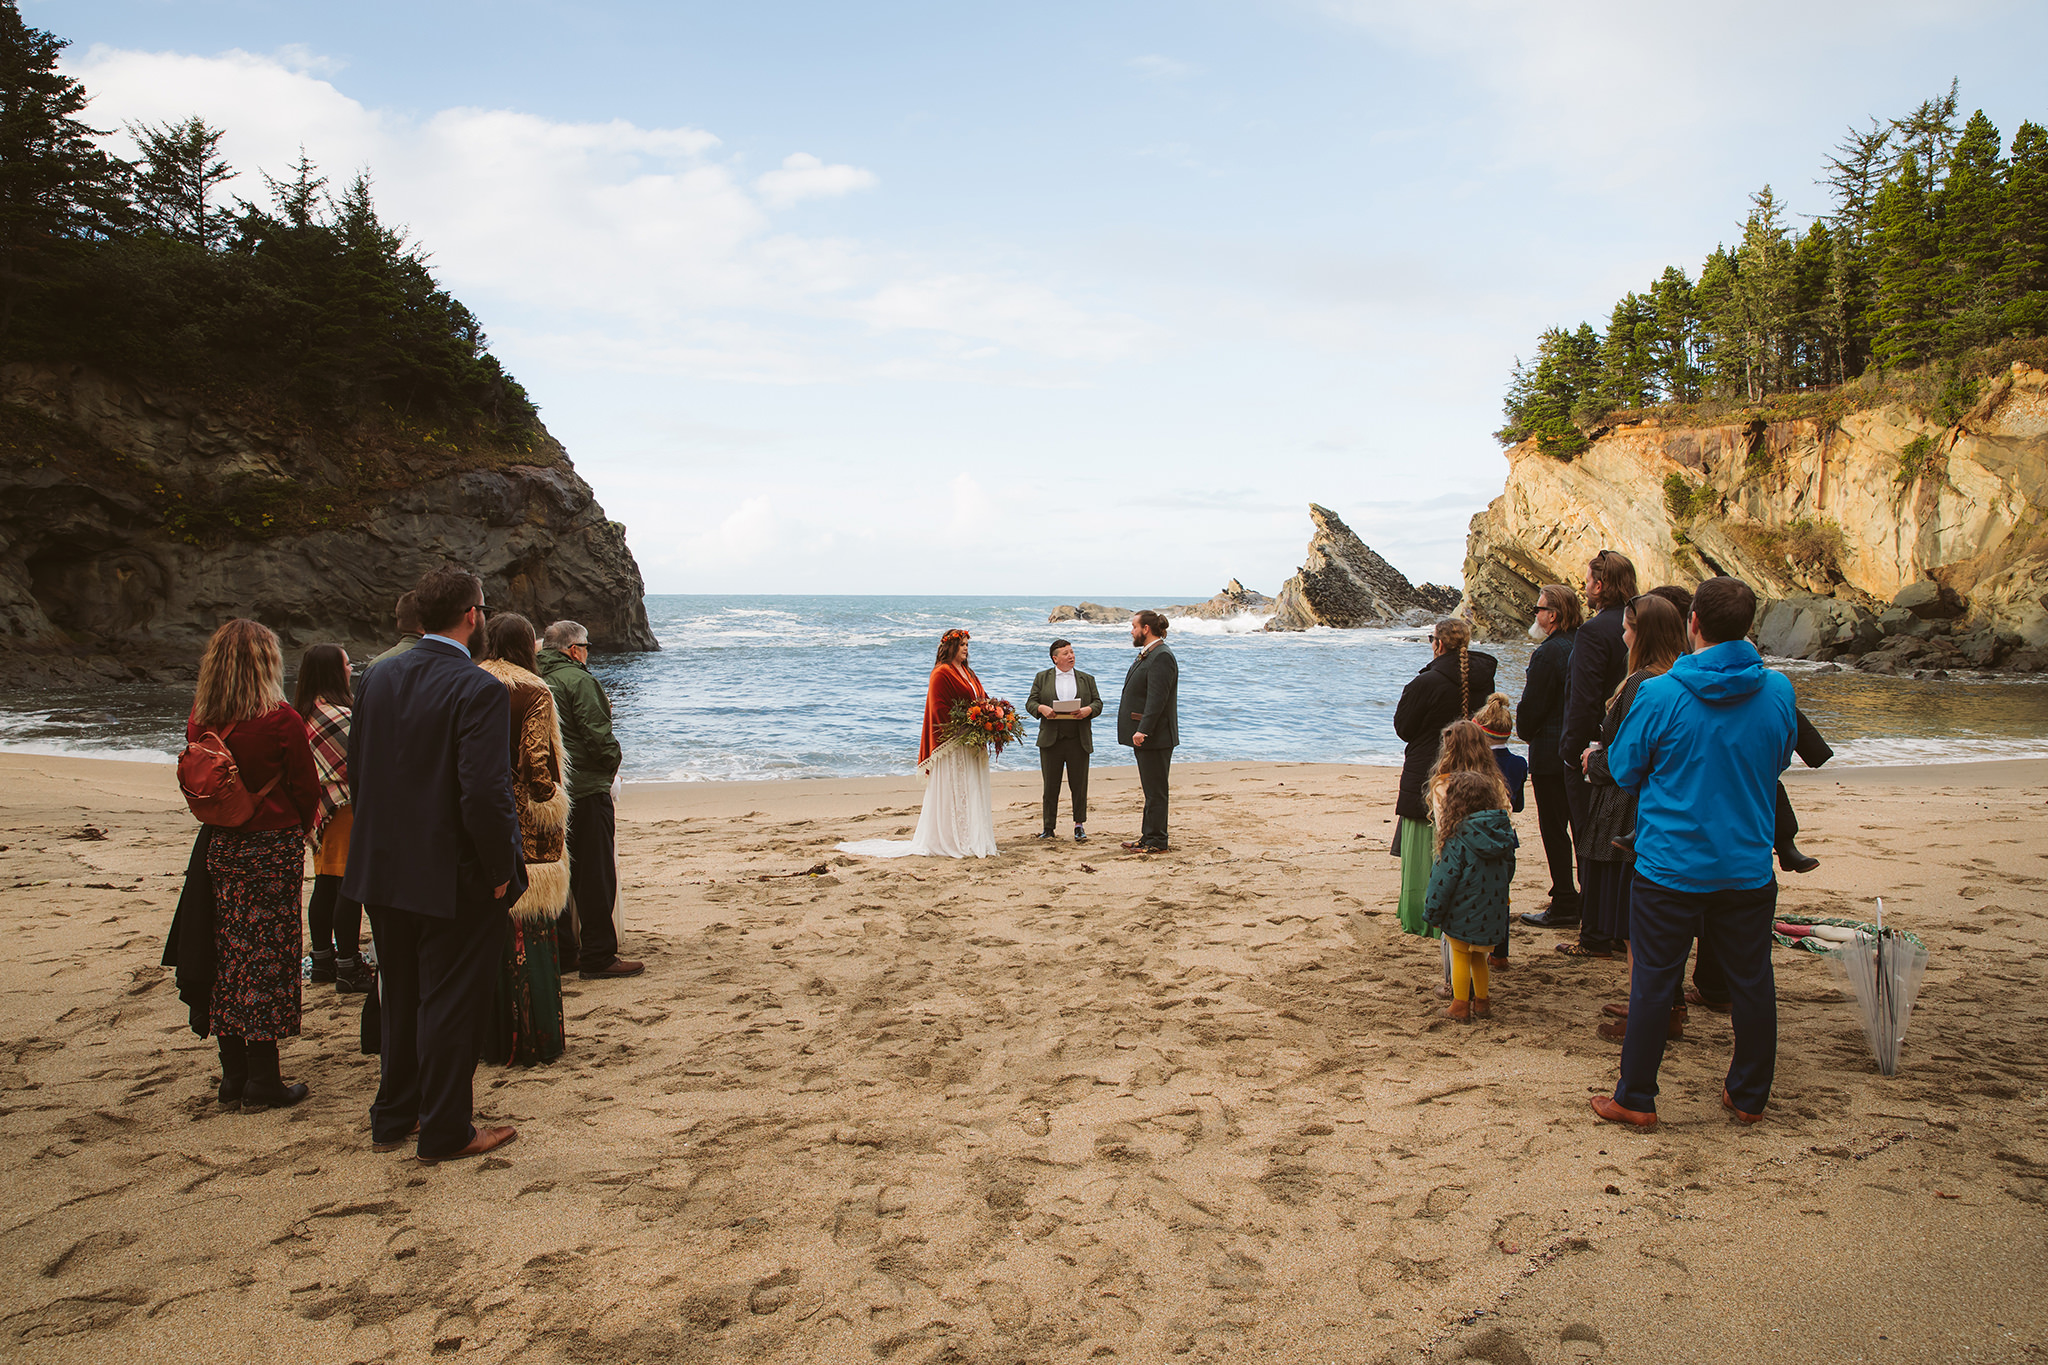 A fall wedding ceremony on Simpson beach at Shore Acres State Park in Coos Bay, Oregon